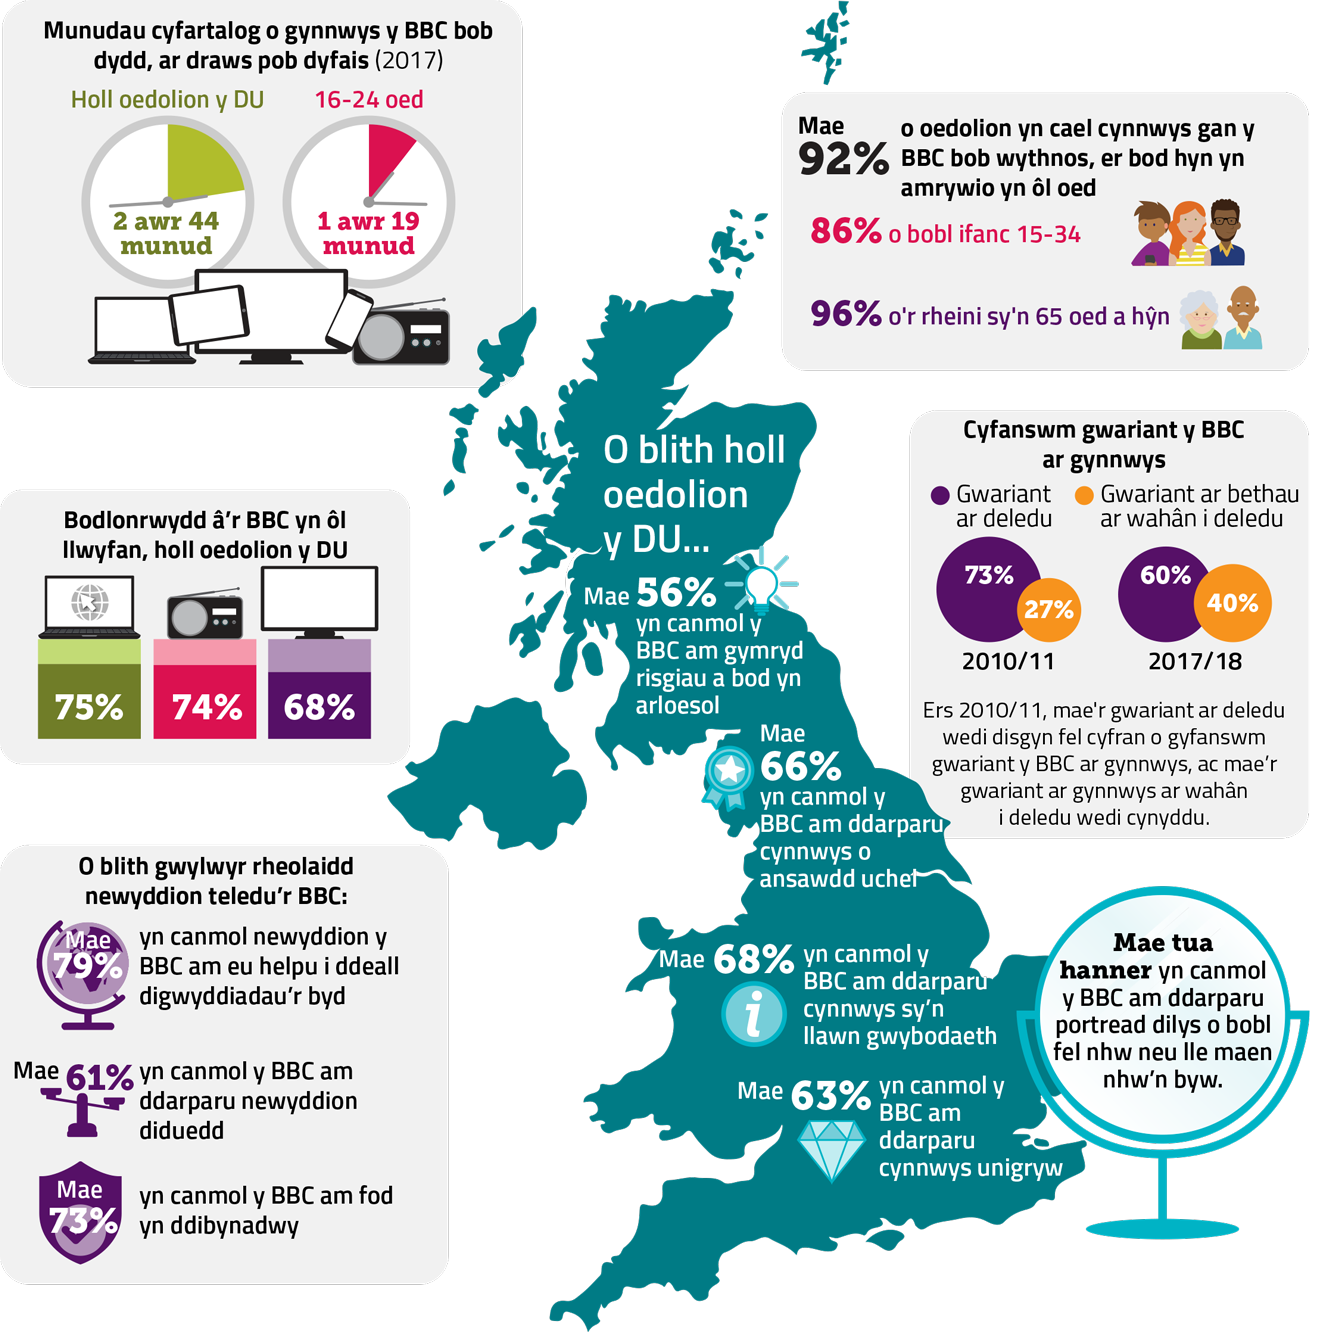 Infographic of statistics relating to the BBC in 2017/18. The figures are as follows. Average minutes of BBC content per day across all devices: two hours and 43 minutes for all UK adults, and one hour and sixteen minutes for those aged sixteen to thirty-four. Satisfaction with the BBC by platform, all UK adults: 75% for on-demand; 74% for radio; 67% for TV. Of regular TV news viewers: 79% rate the BBC's news highly for helping them understand what's going on in the world today; 61% rate the BBC highly for providing impartial news; 73% rate the BBC highly for being trustworthy. Of all UK adults: 56% rate the BBC highly for taking risks and being innovative; 66% rat the BBC highly for high quality content; 68% rate the BBC highly for informative content; 63% rate the BBC highly for distinctive content. Around half rate the BBC highly for providing an authentic portrayal people like themselves or where they live. 92% of adults consumer BBC content each week, though this varies by age: 86% for 15 to 34 year-olds, and 96% for those aged 65 and over. BBC total content spend: since 2010/11, TV has fallen as a proportion of the BBC's total content spend, while spending on non-TV content has increased.